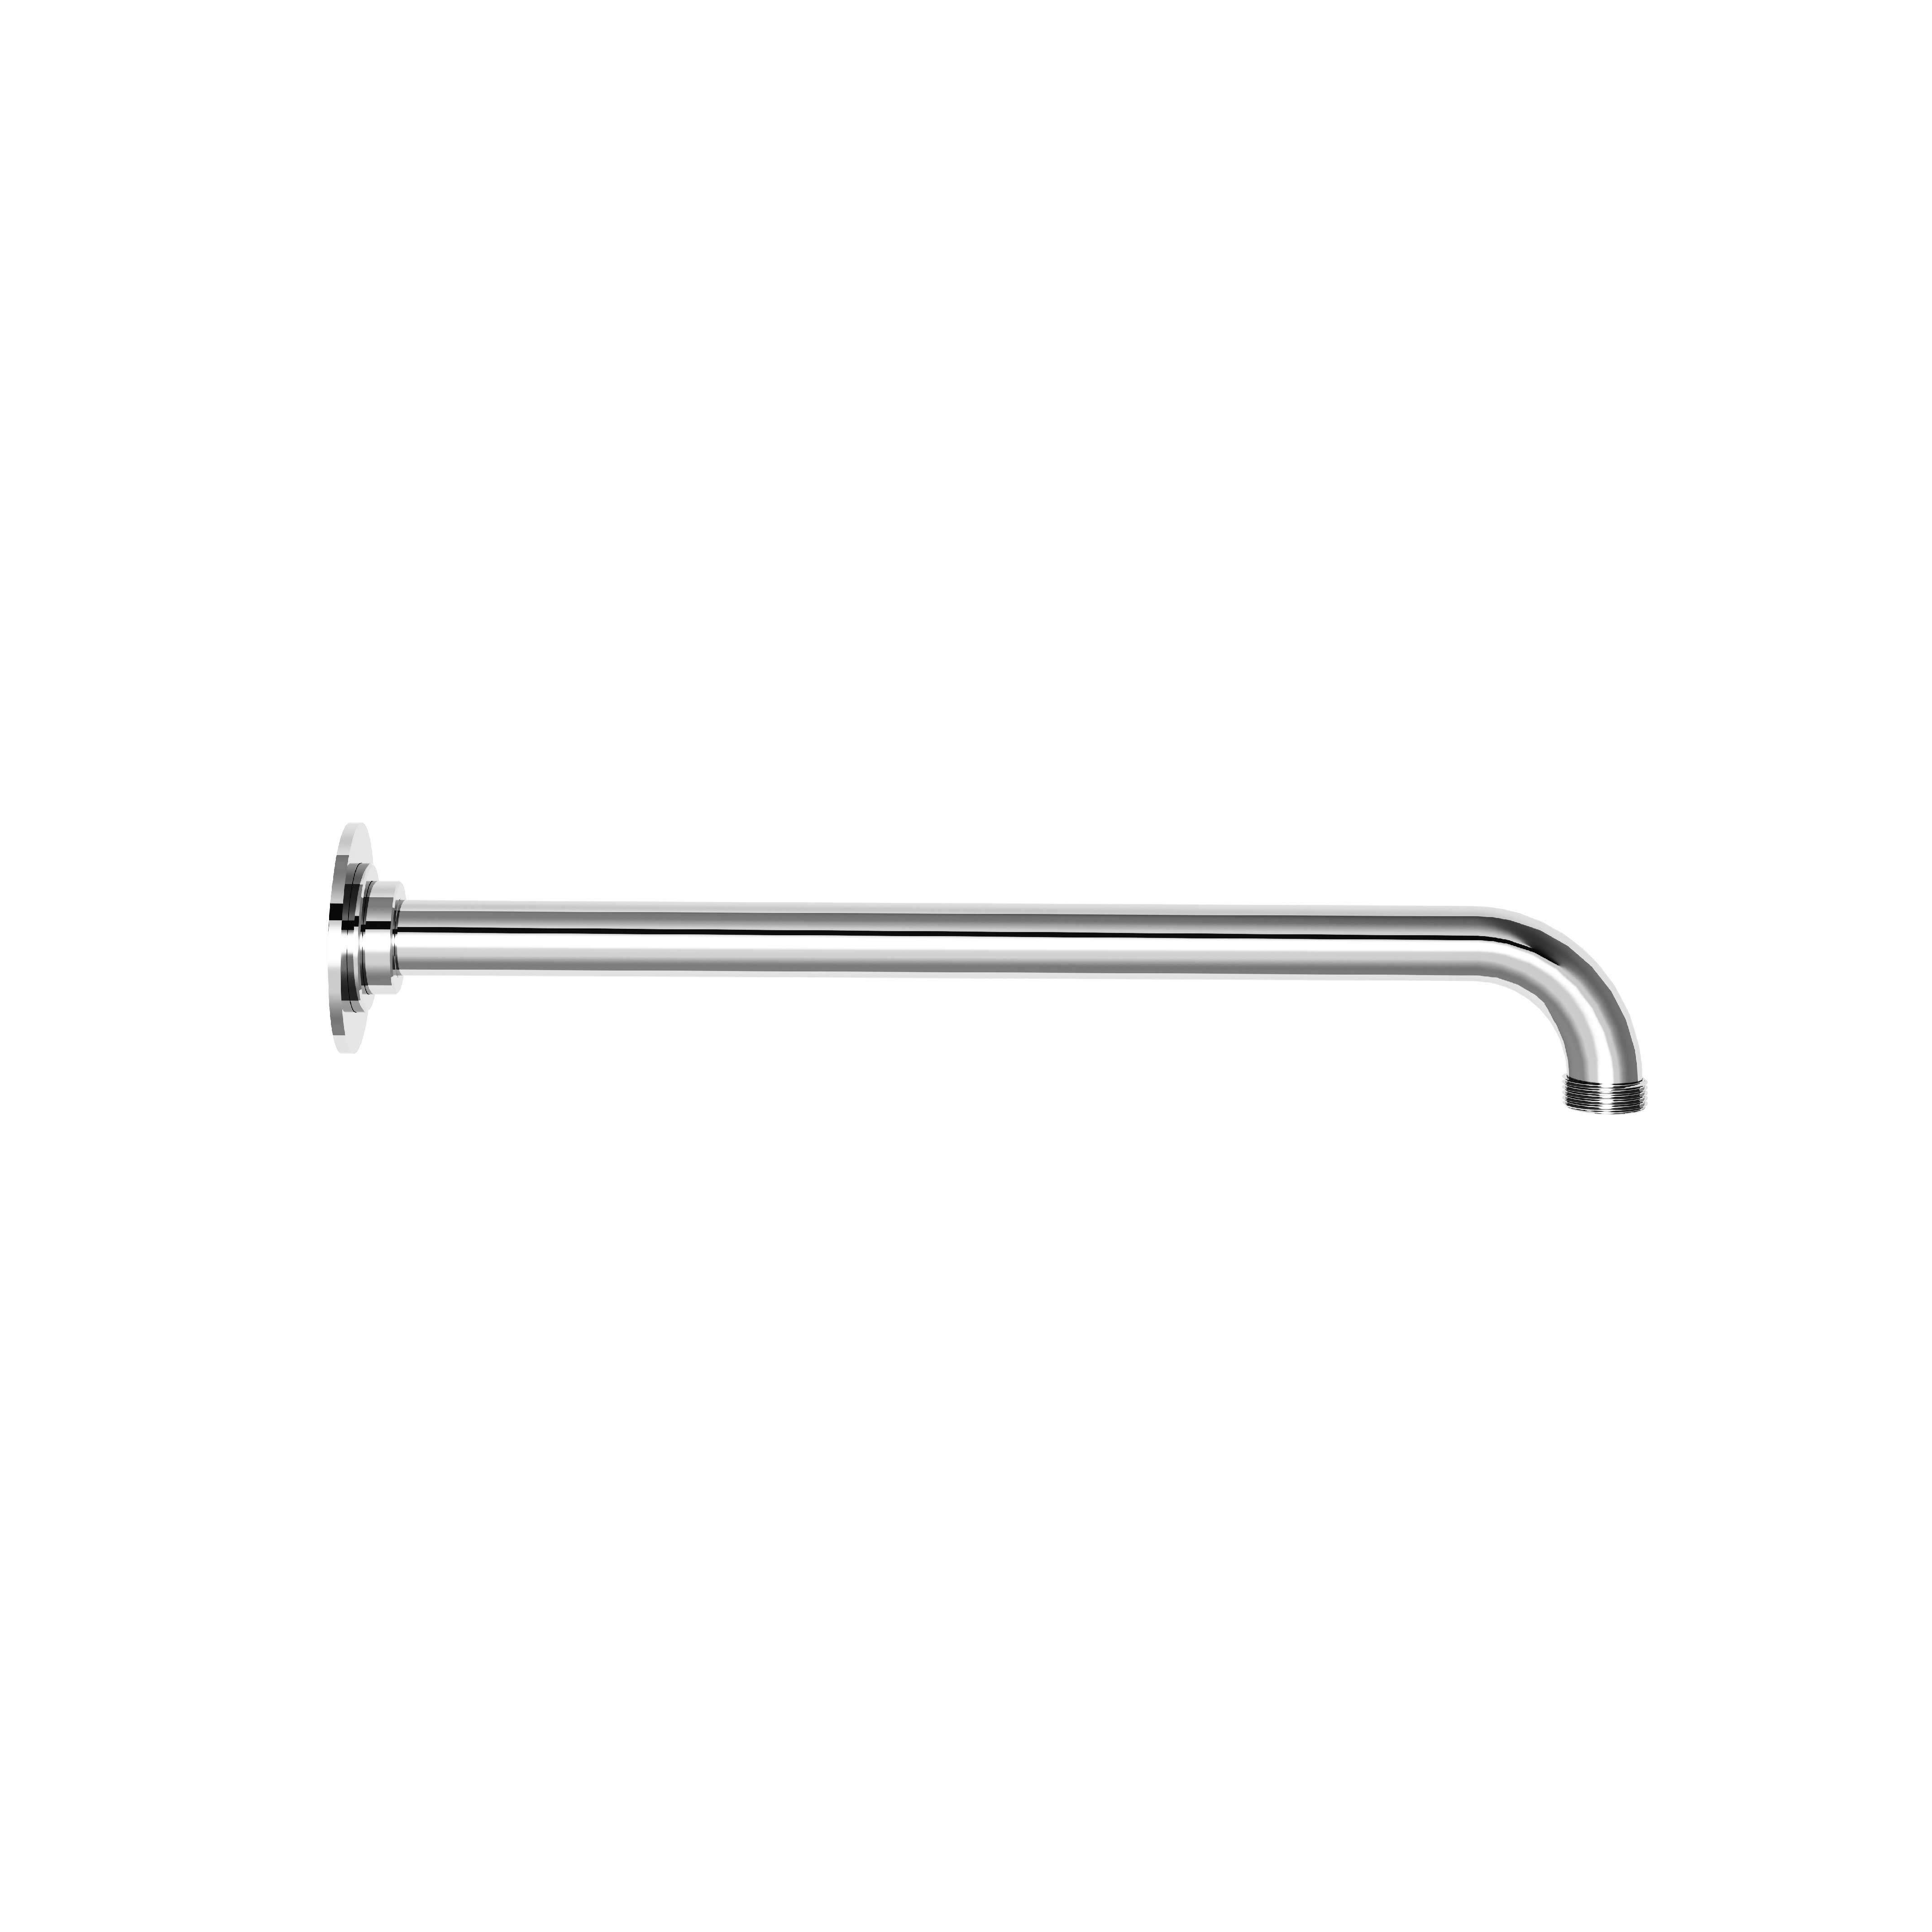 M38-2W301 Wall mounted shower arm 300mm